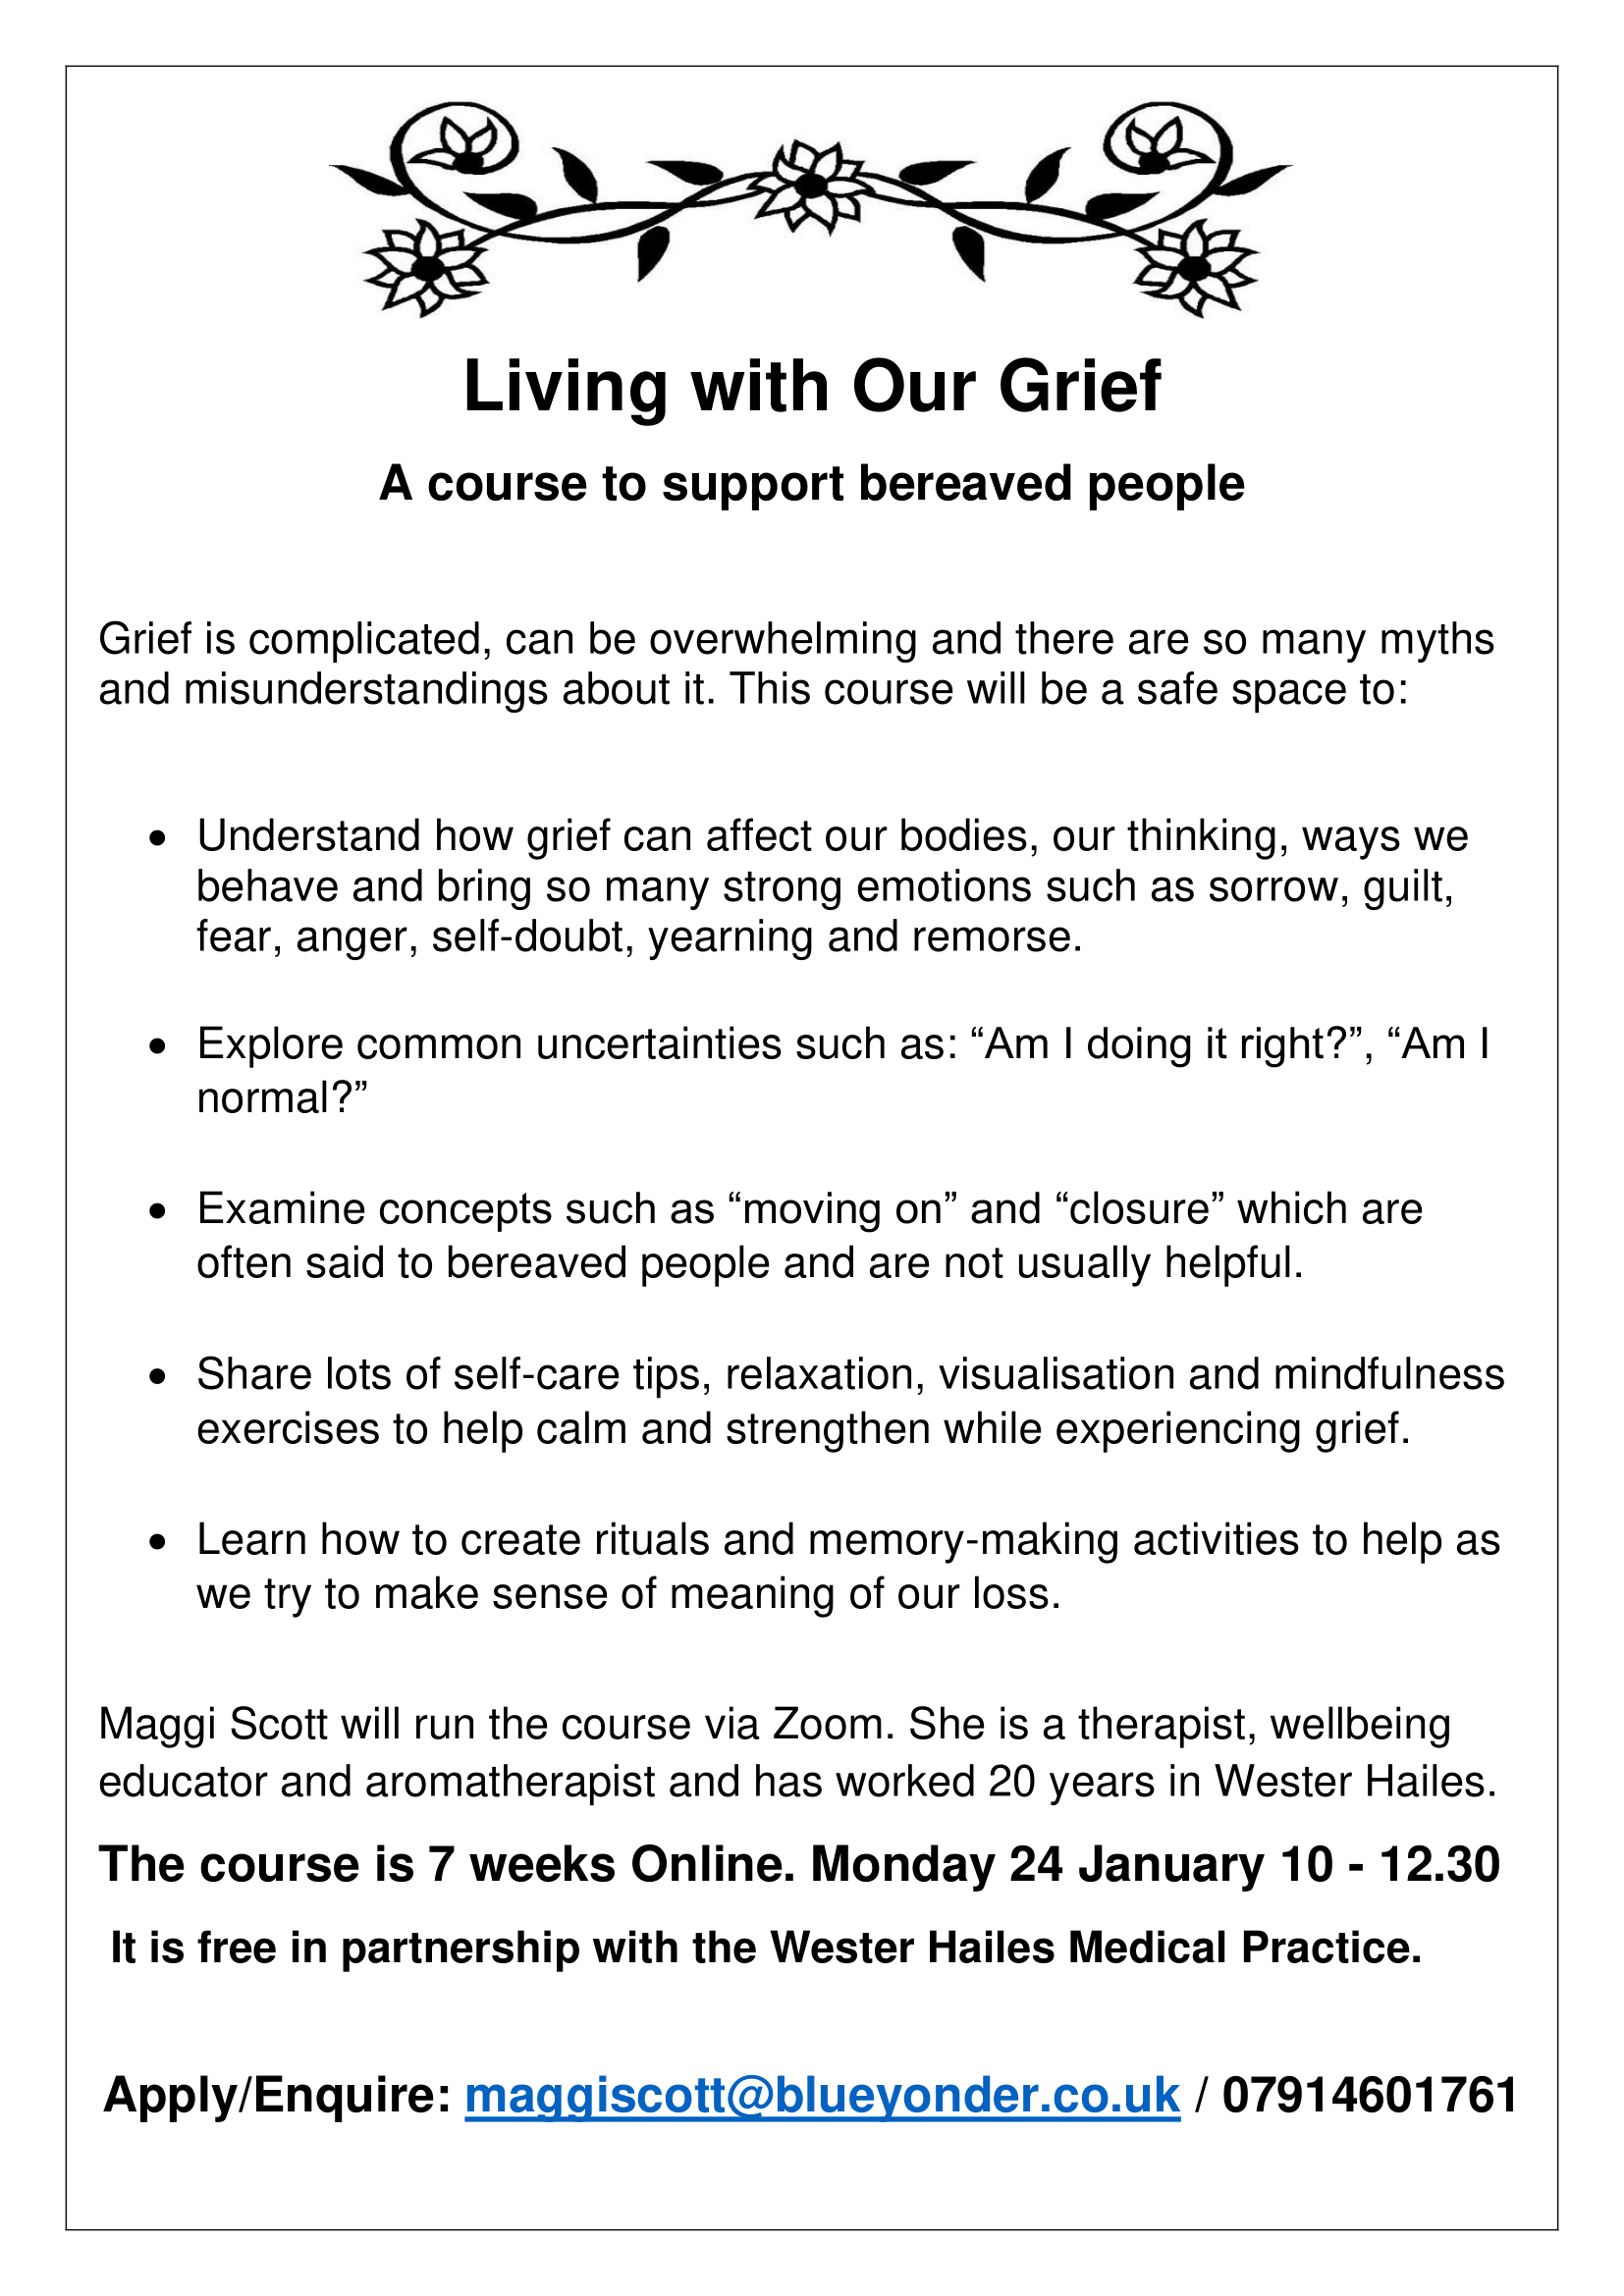 Living with our Grief Digital Sentinel Featured Image